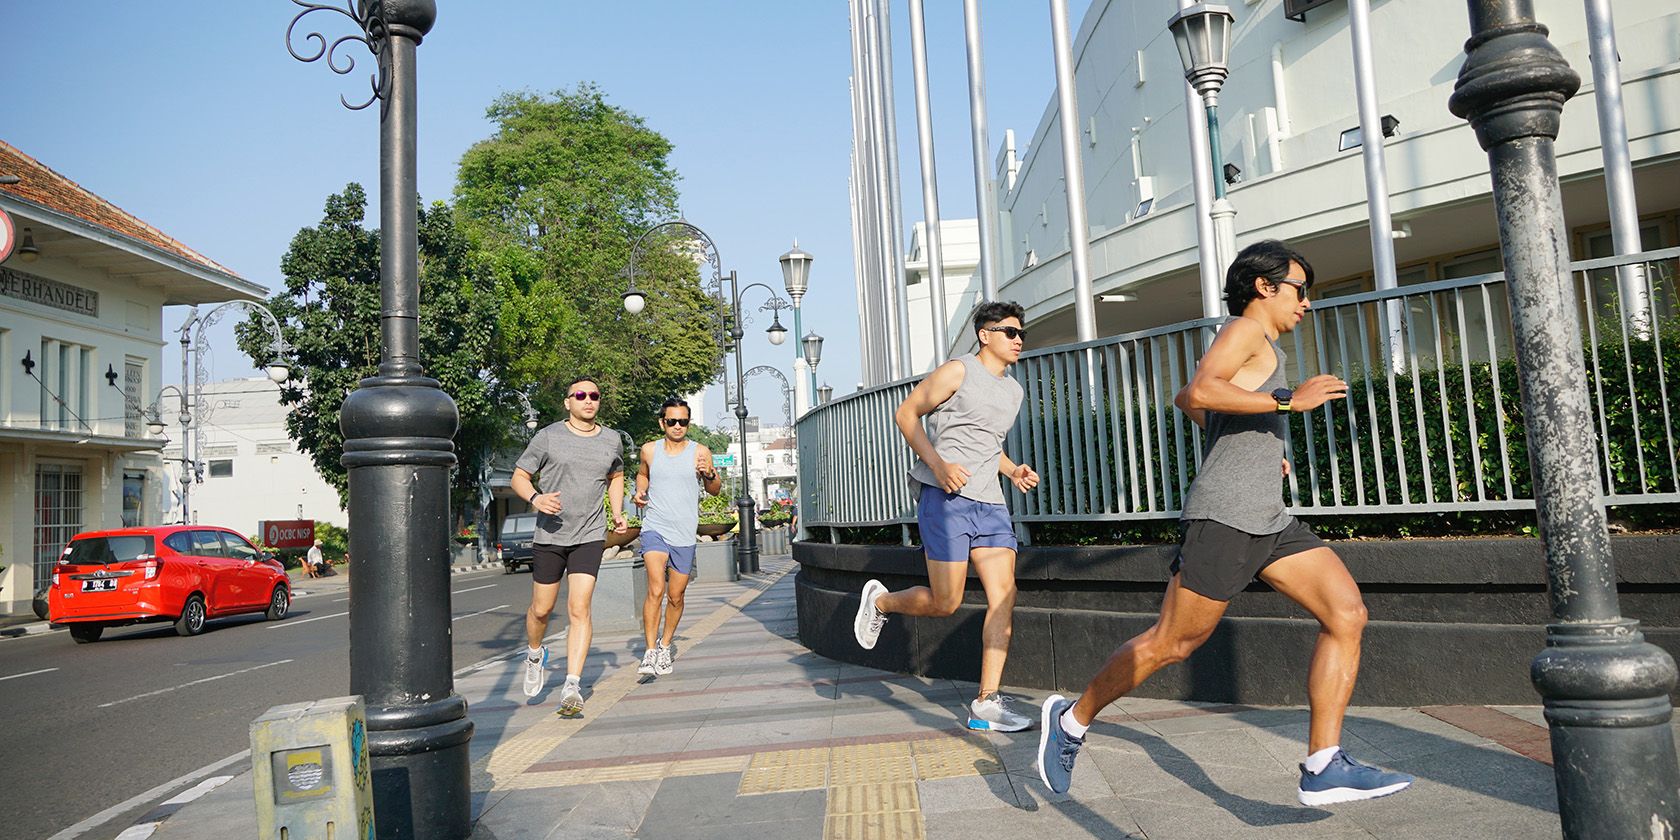 Group of runners in a city